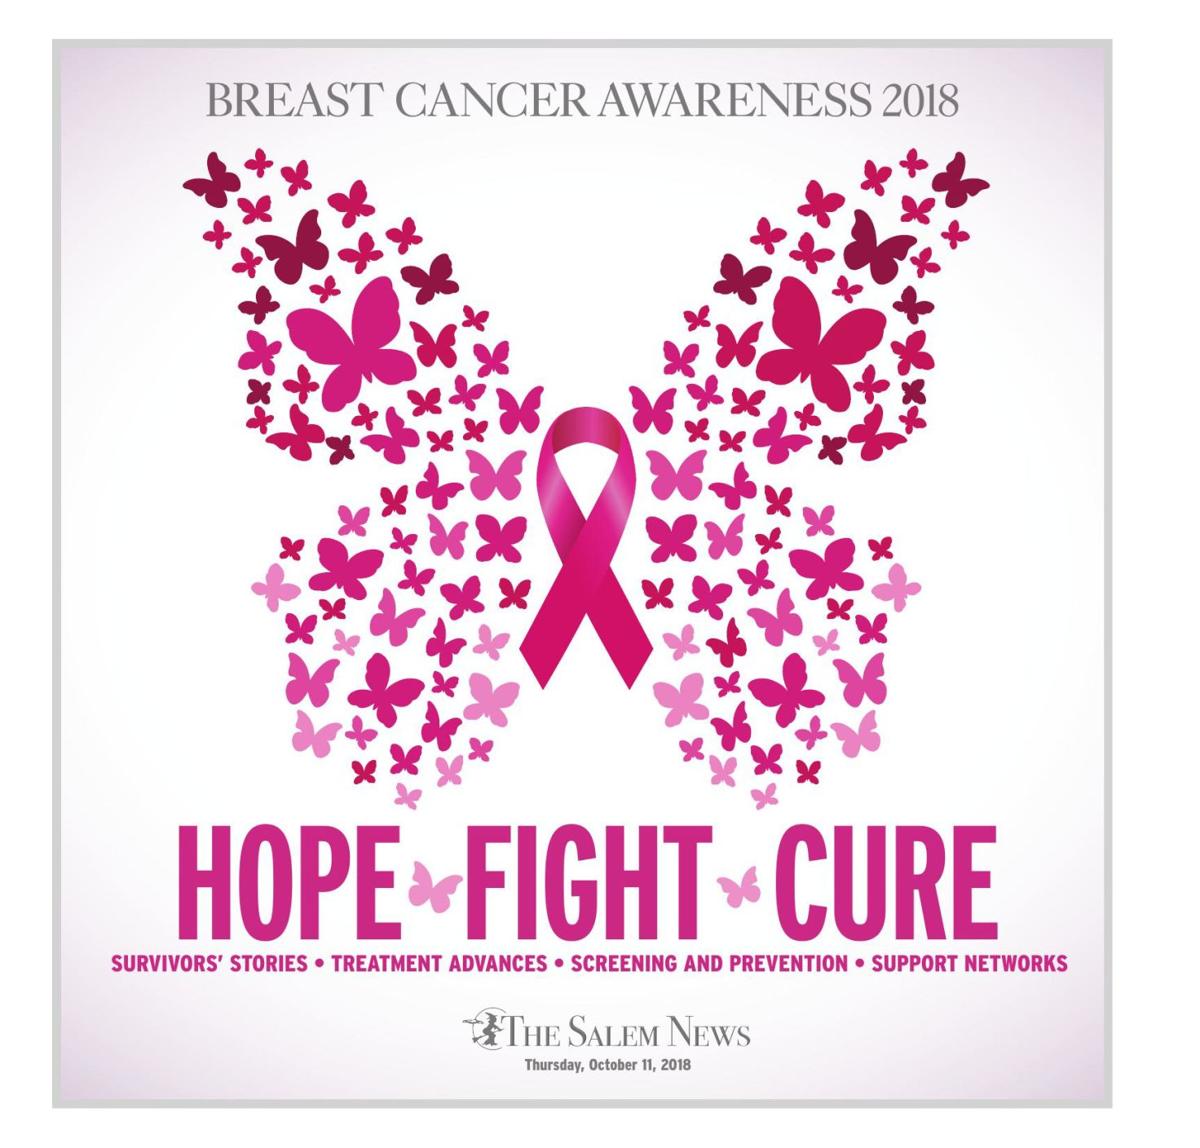 Breast Cancer Awareness 2018 Part 1